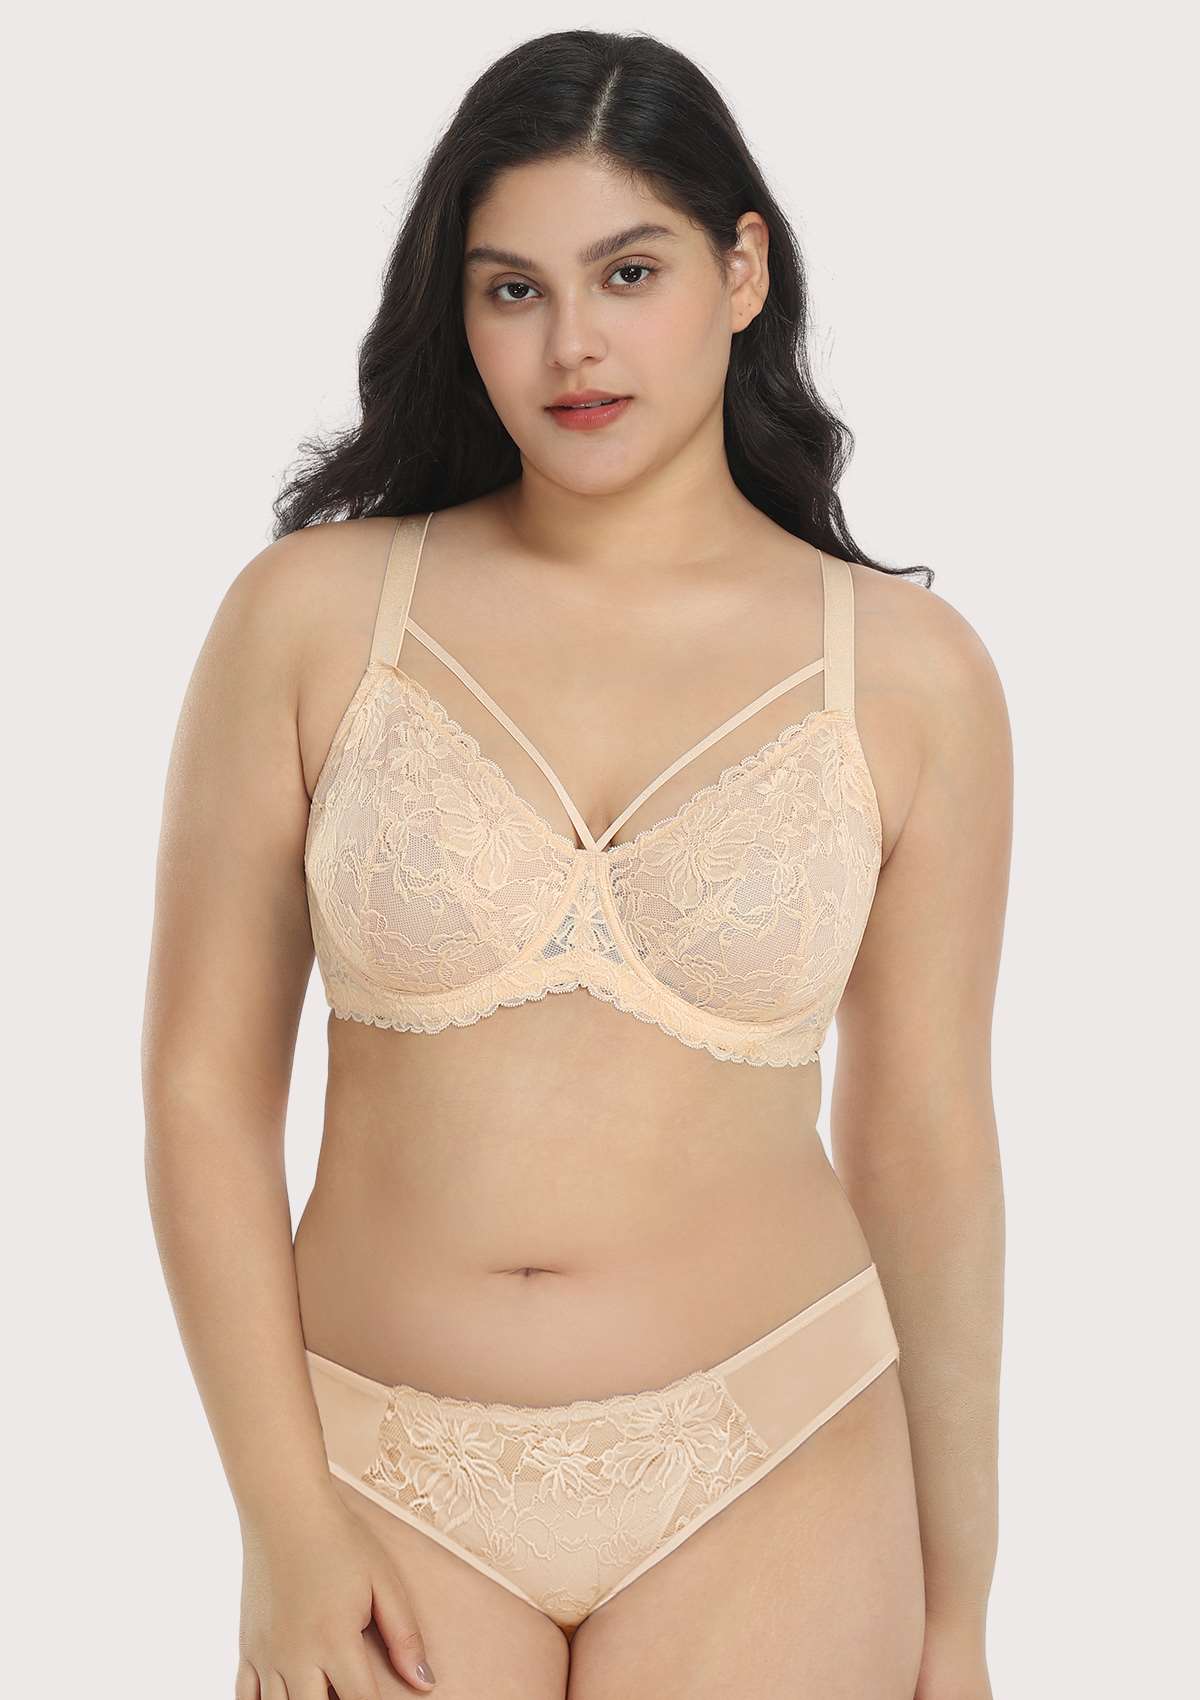 HSIA Pretty In Petals Lace Bra And Panty Set: Comfortable Support Bra - Beige Cream / 44 / D